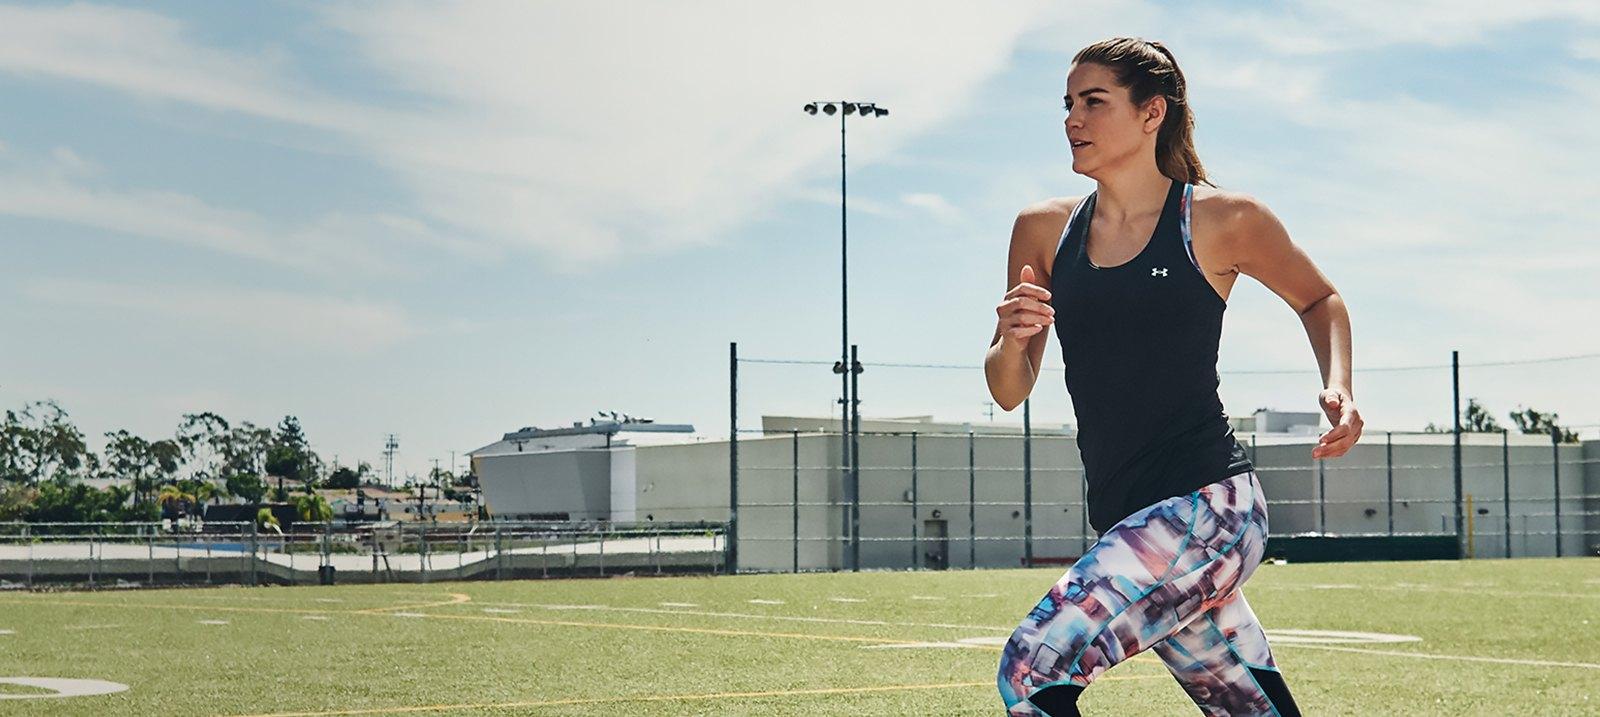 Under Armour: Women's Running and other sports